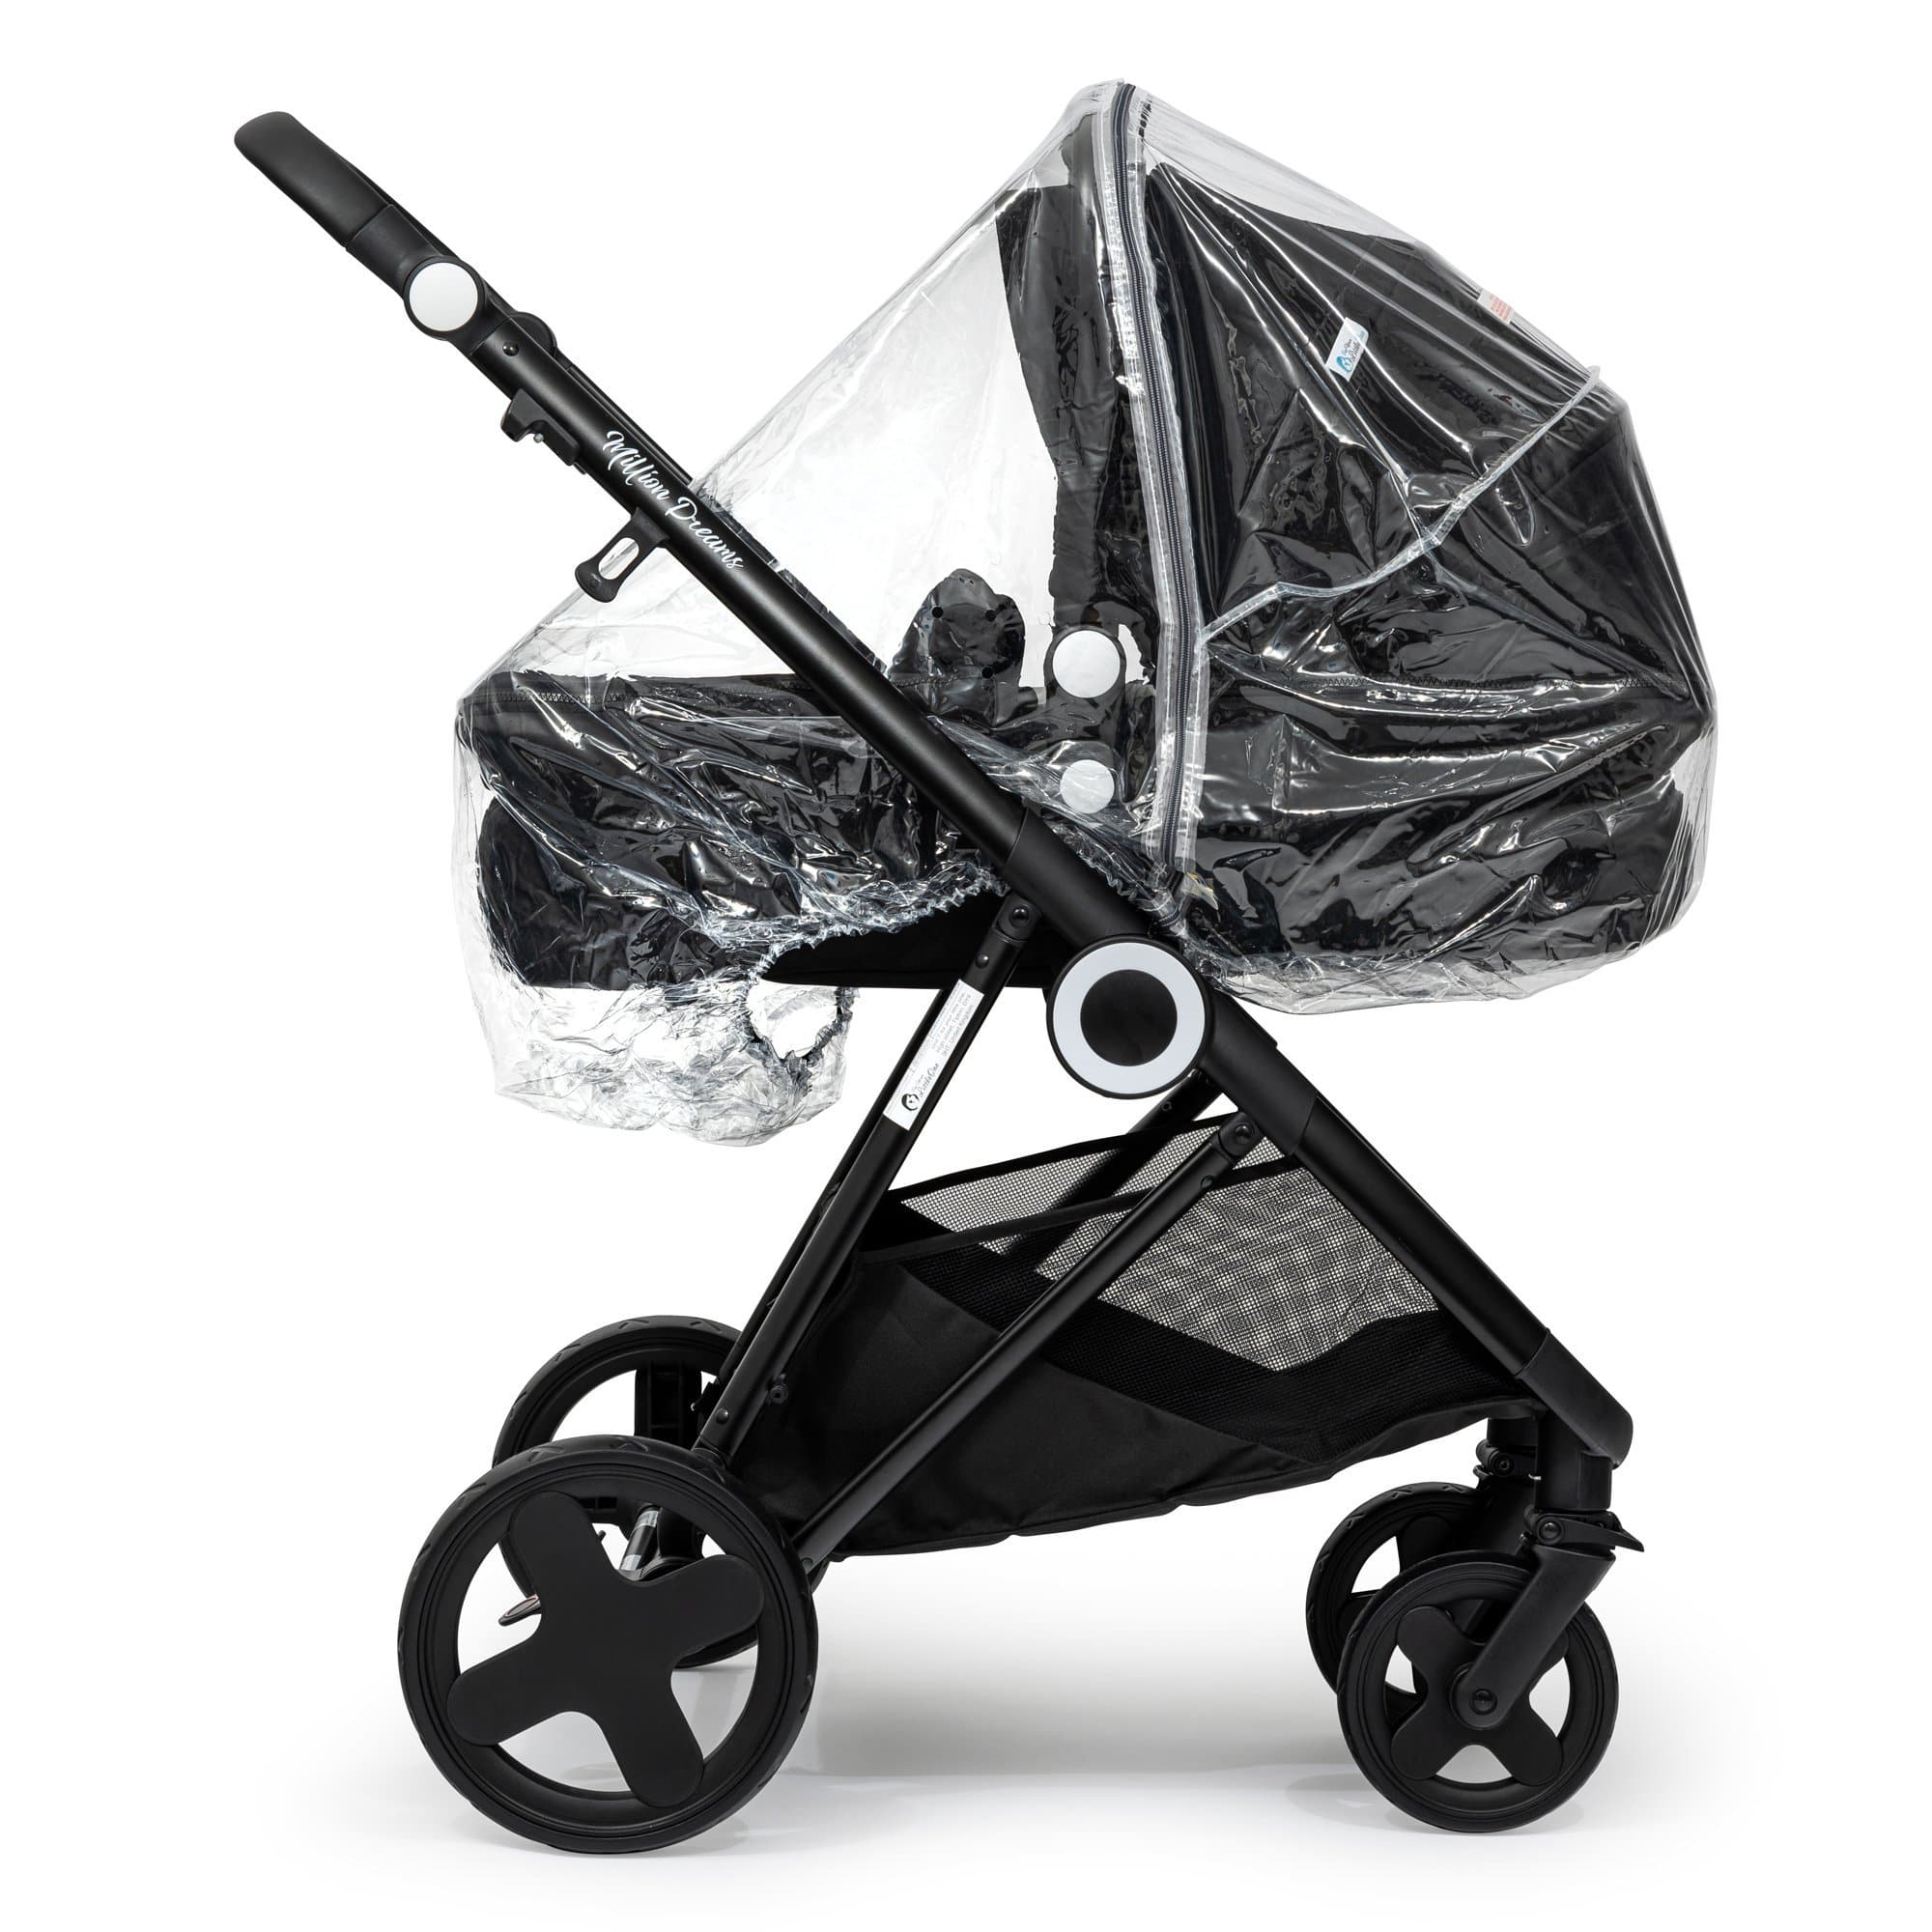 2 in 1 Rain Cover Compatible with Looping - Fits All Models - For Your Little One